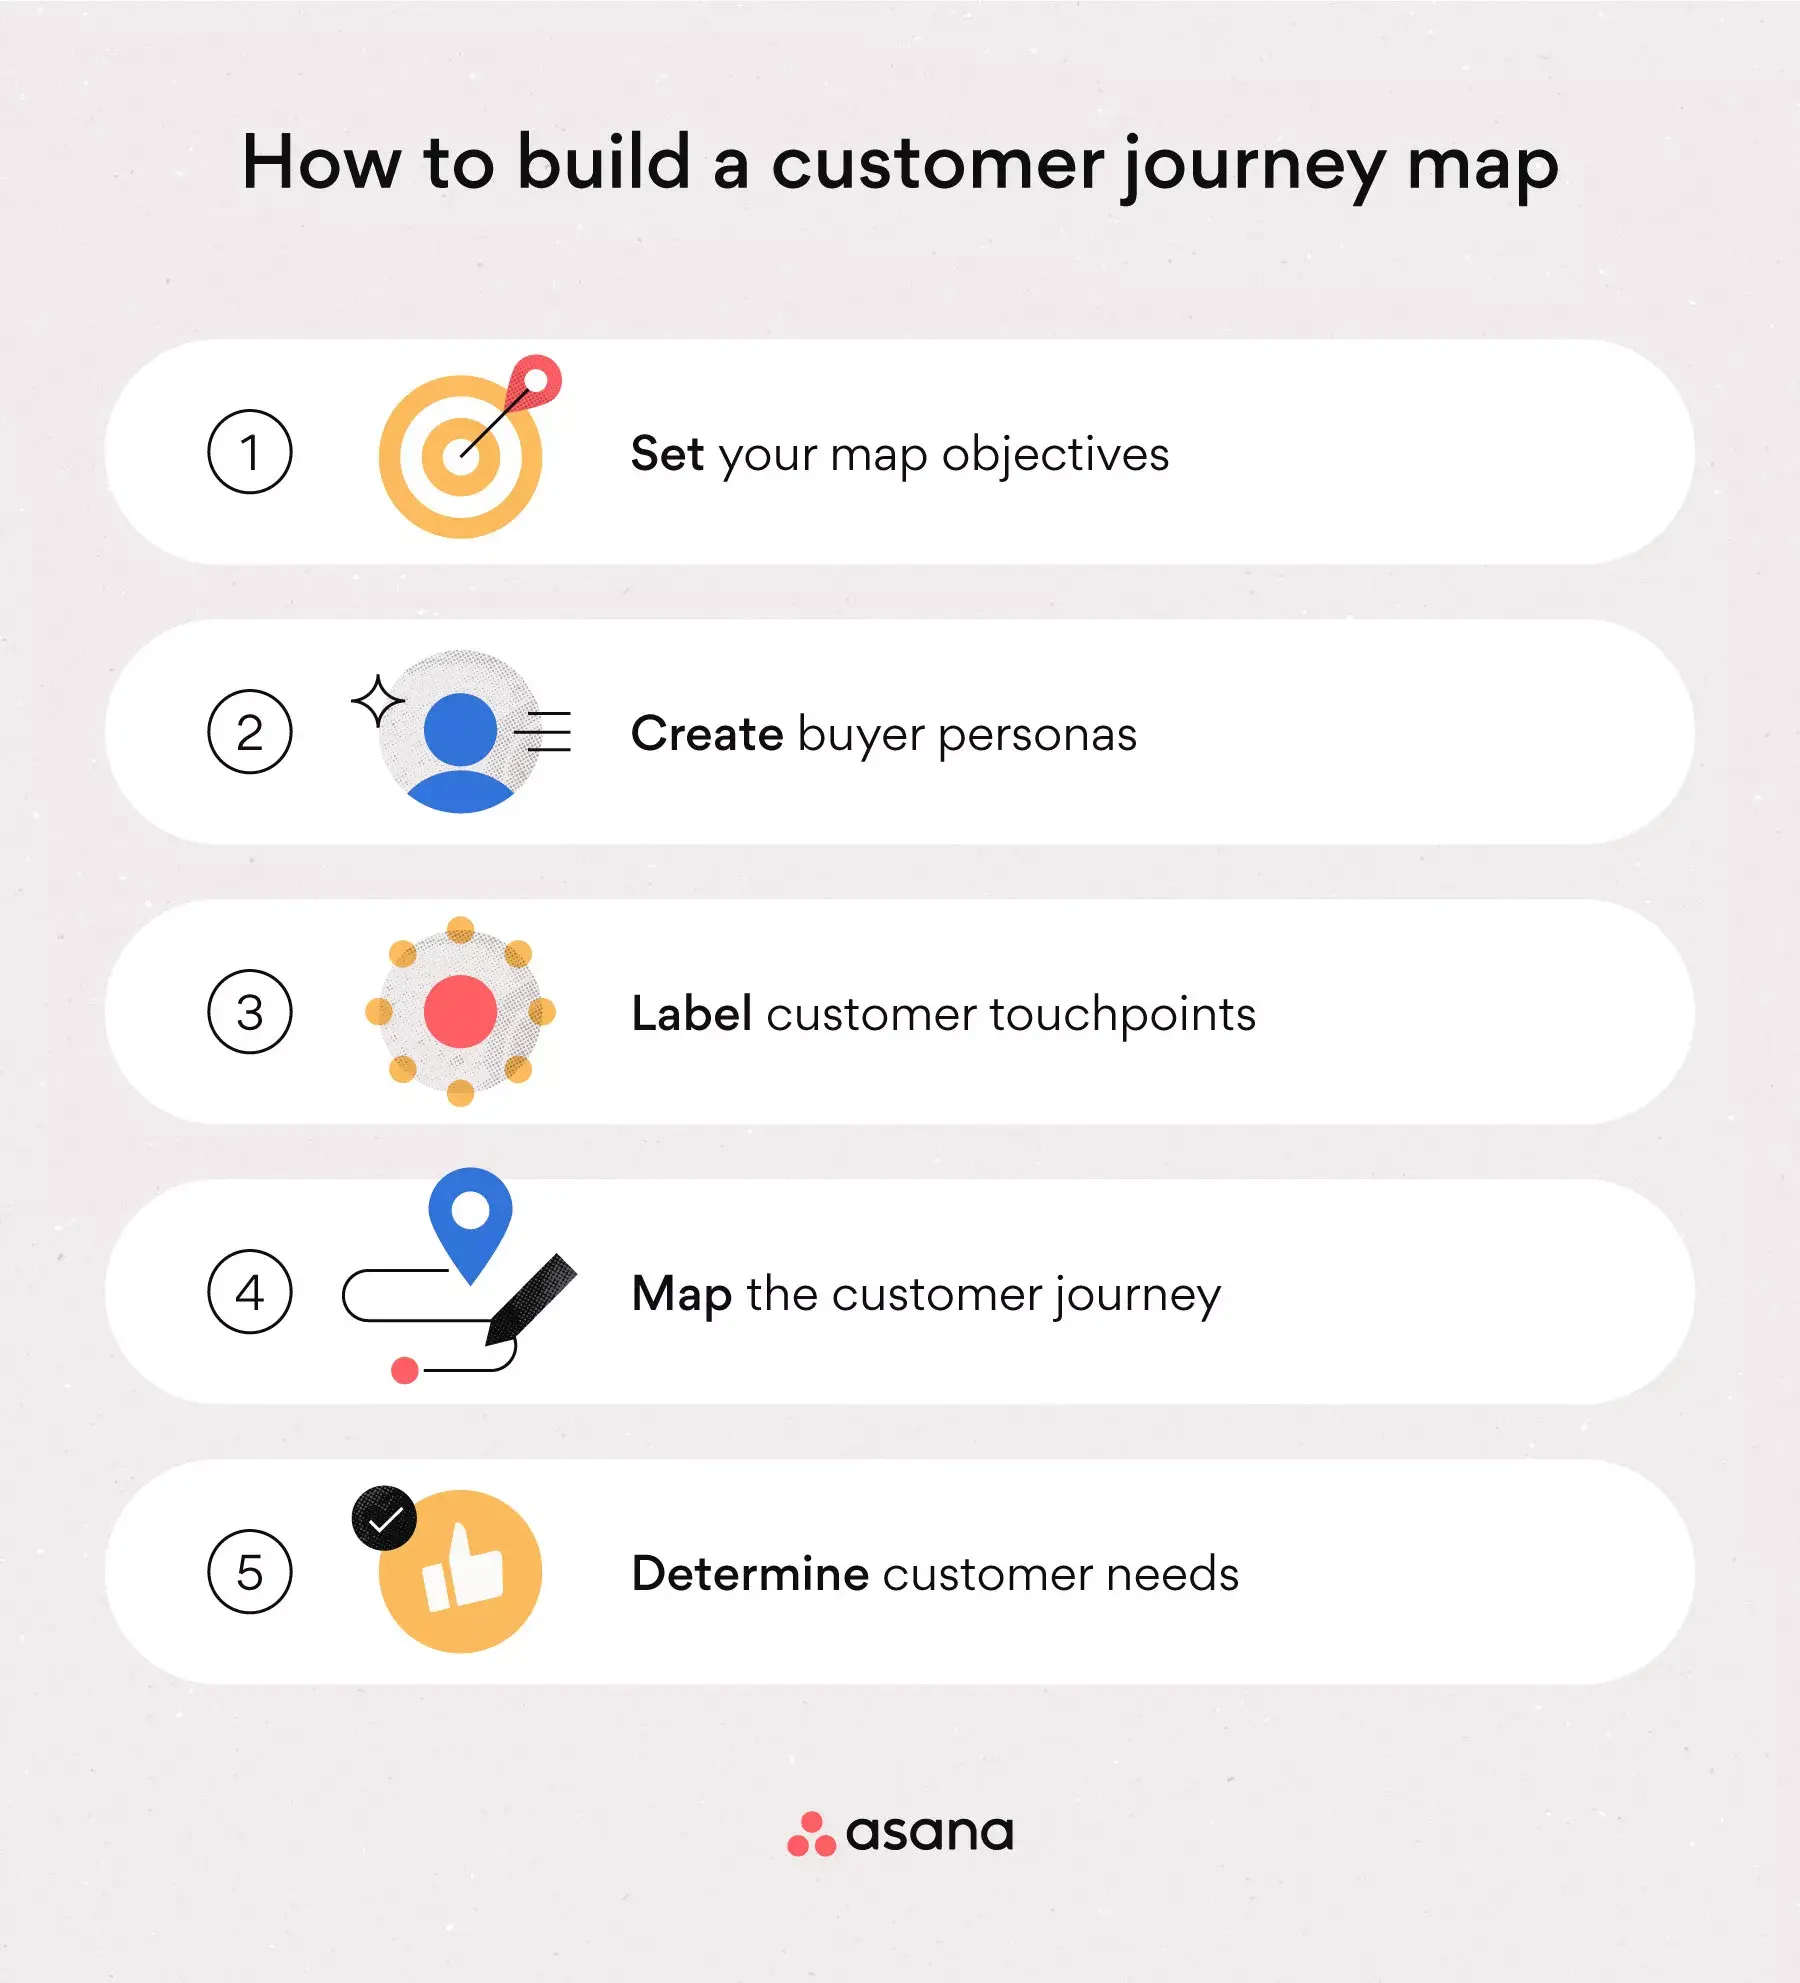 [inline illustration] How to build a customer journey map (infographic)